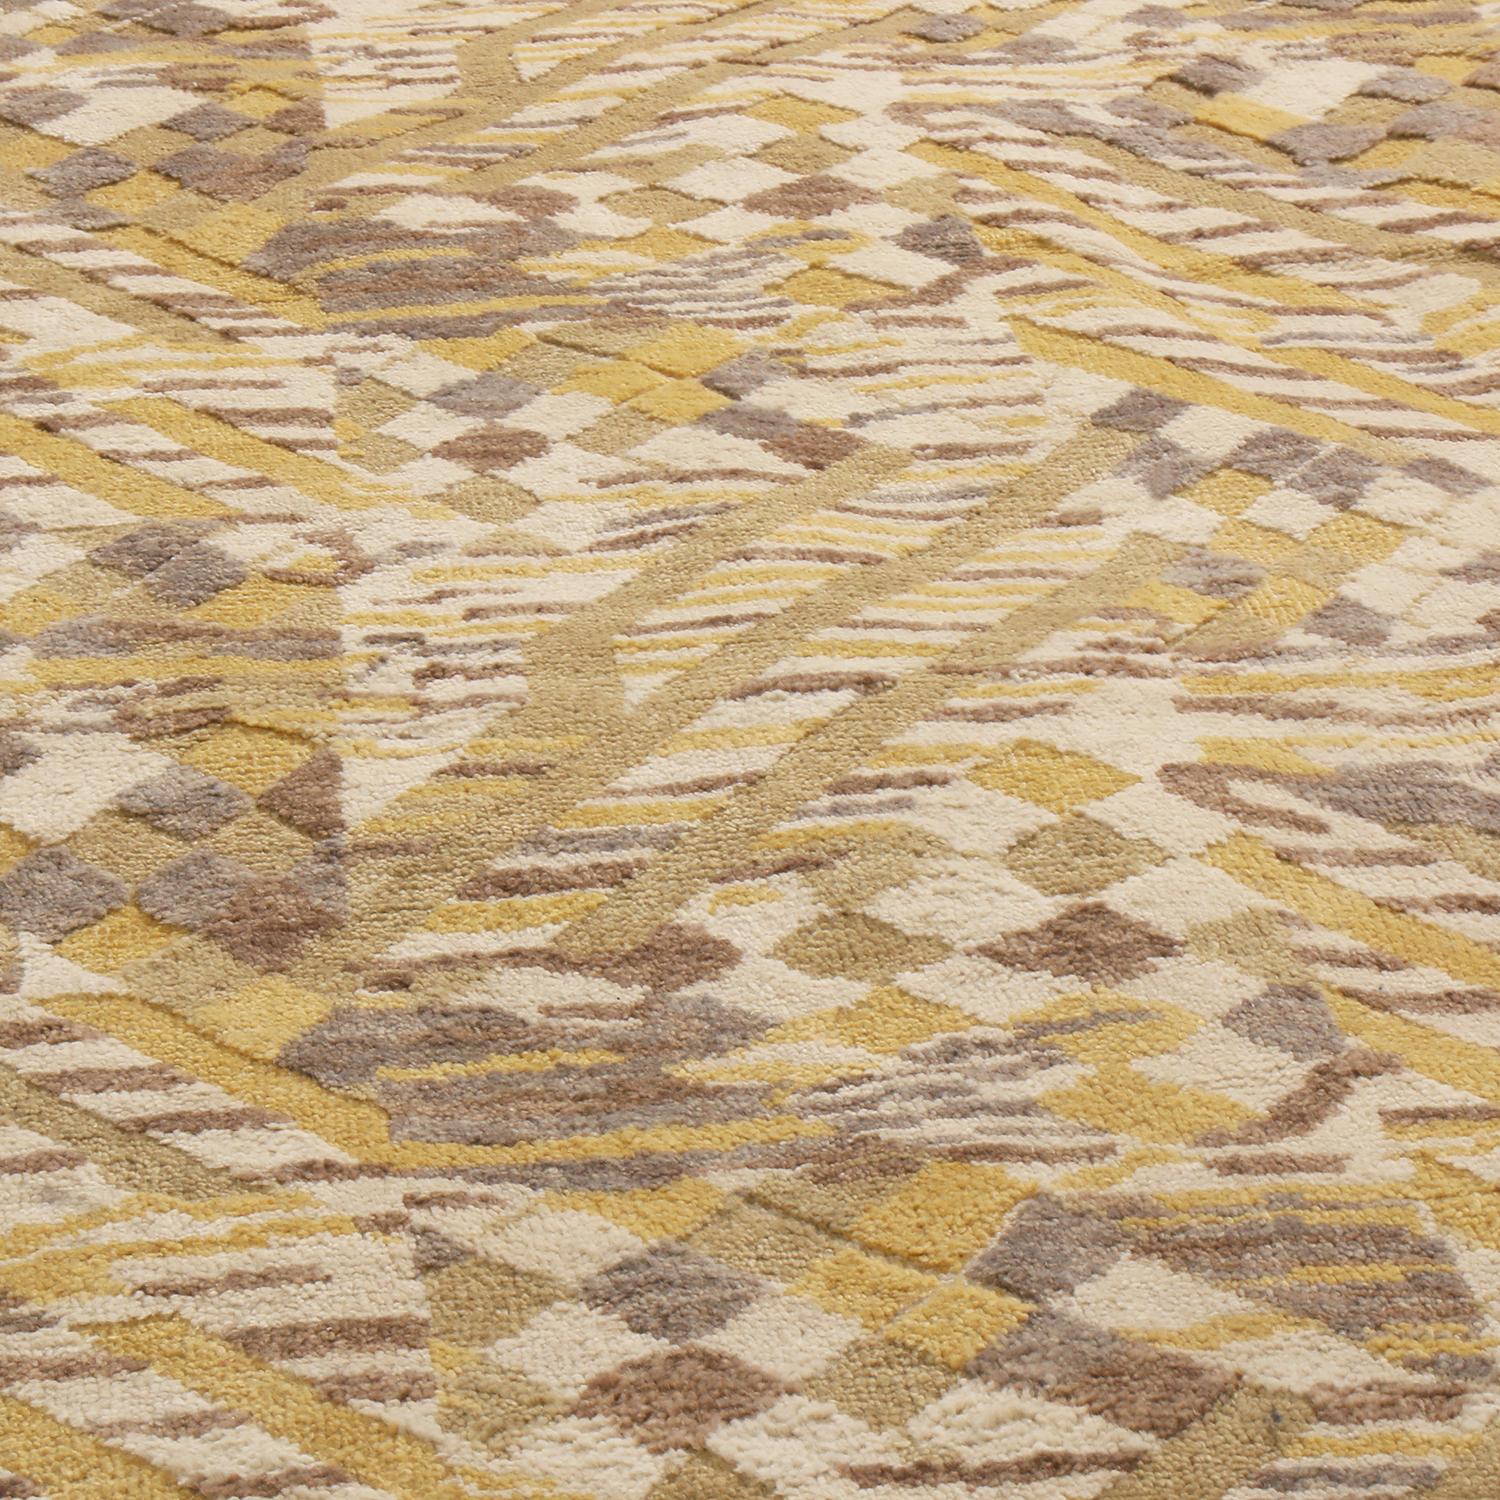 Originating from India, this hand knotted contemporary pile rug hails from Rug & Kilim’s Scandinavian-inspired collection, featuring a distinct dimensional all-over field design with golden-yellow and multi-tonal beige colourways with lively blue